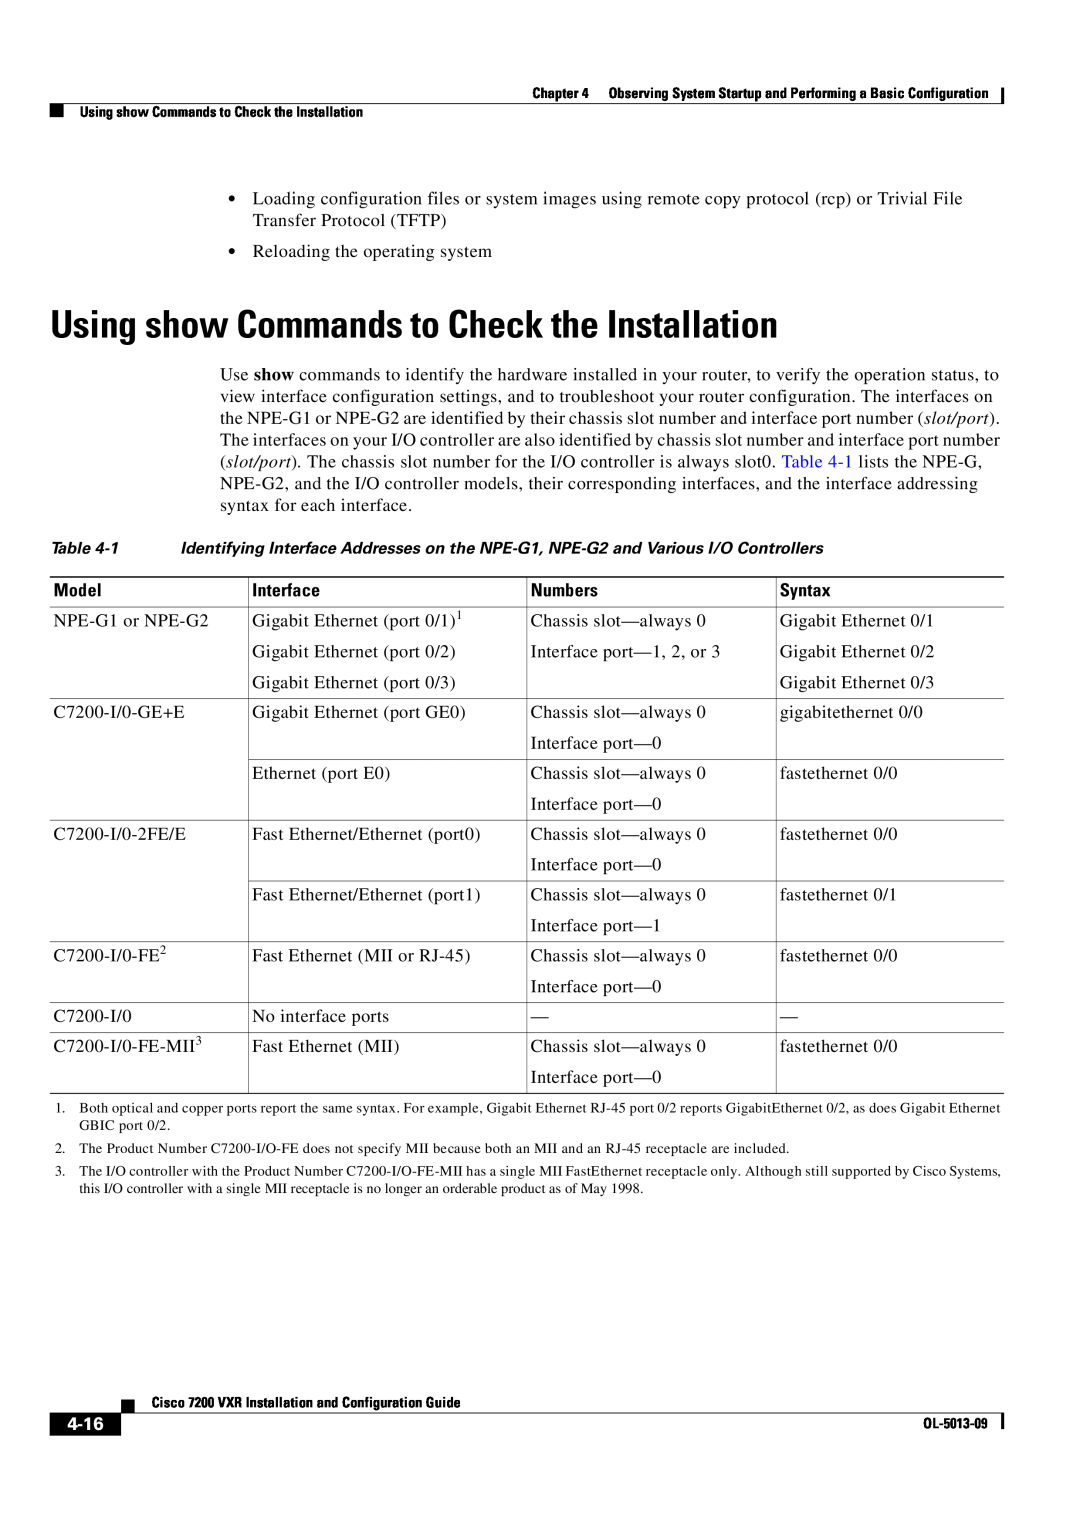 Cisco Systems 7200 VXR manual Using show Commands to Check the Installation, 4-16 